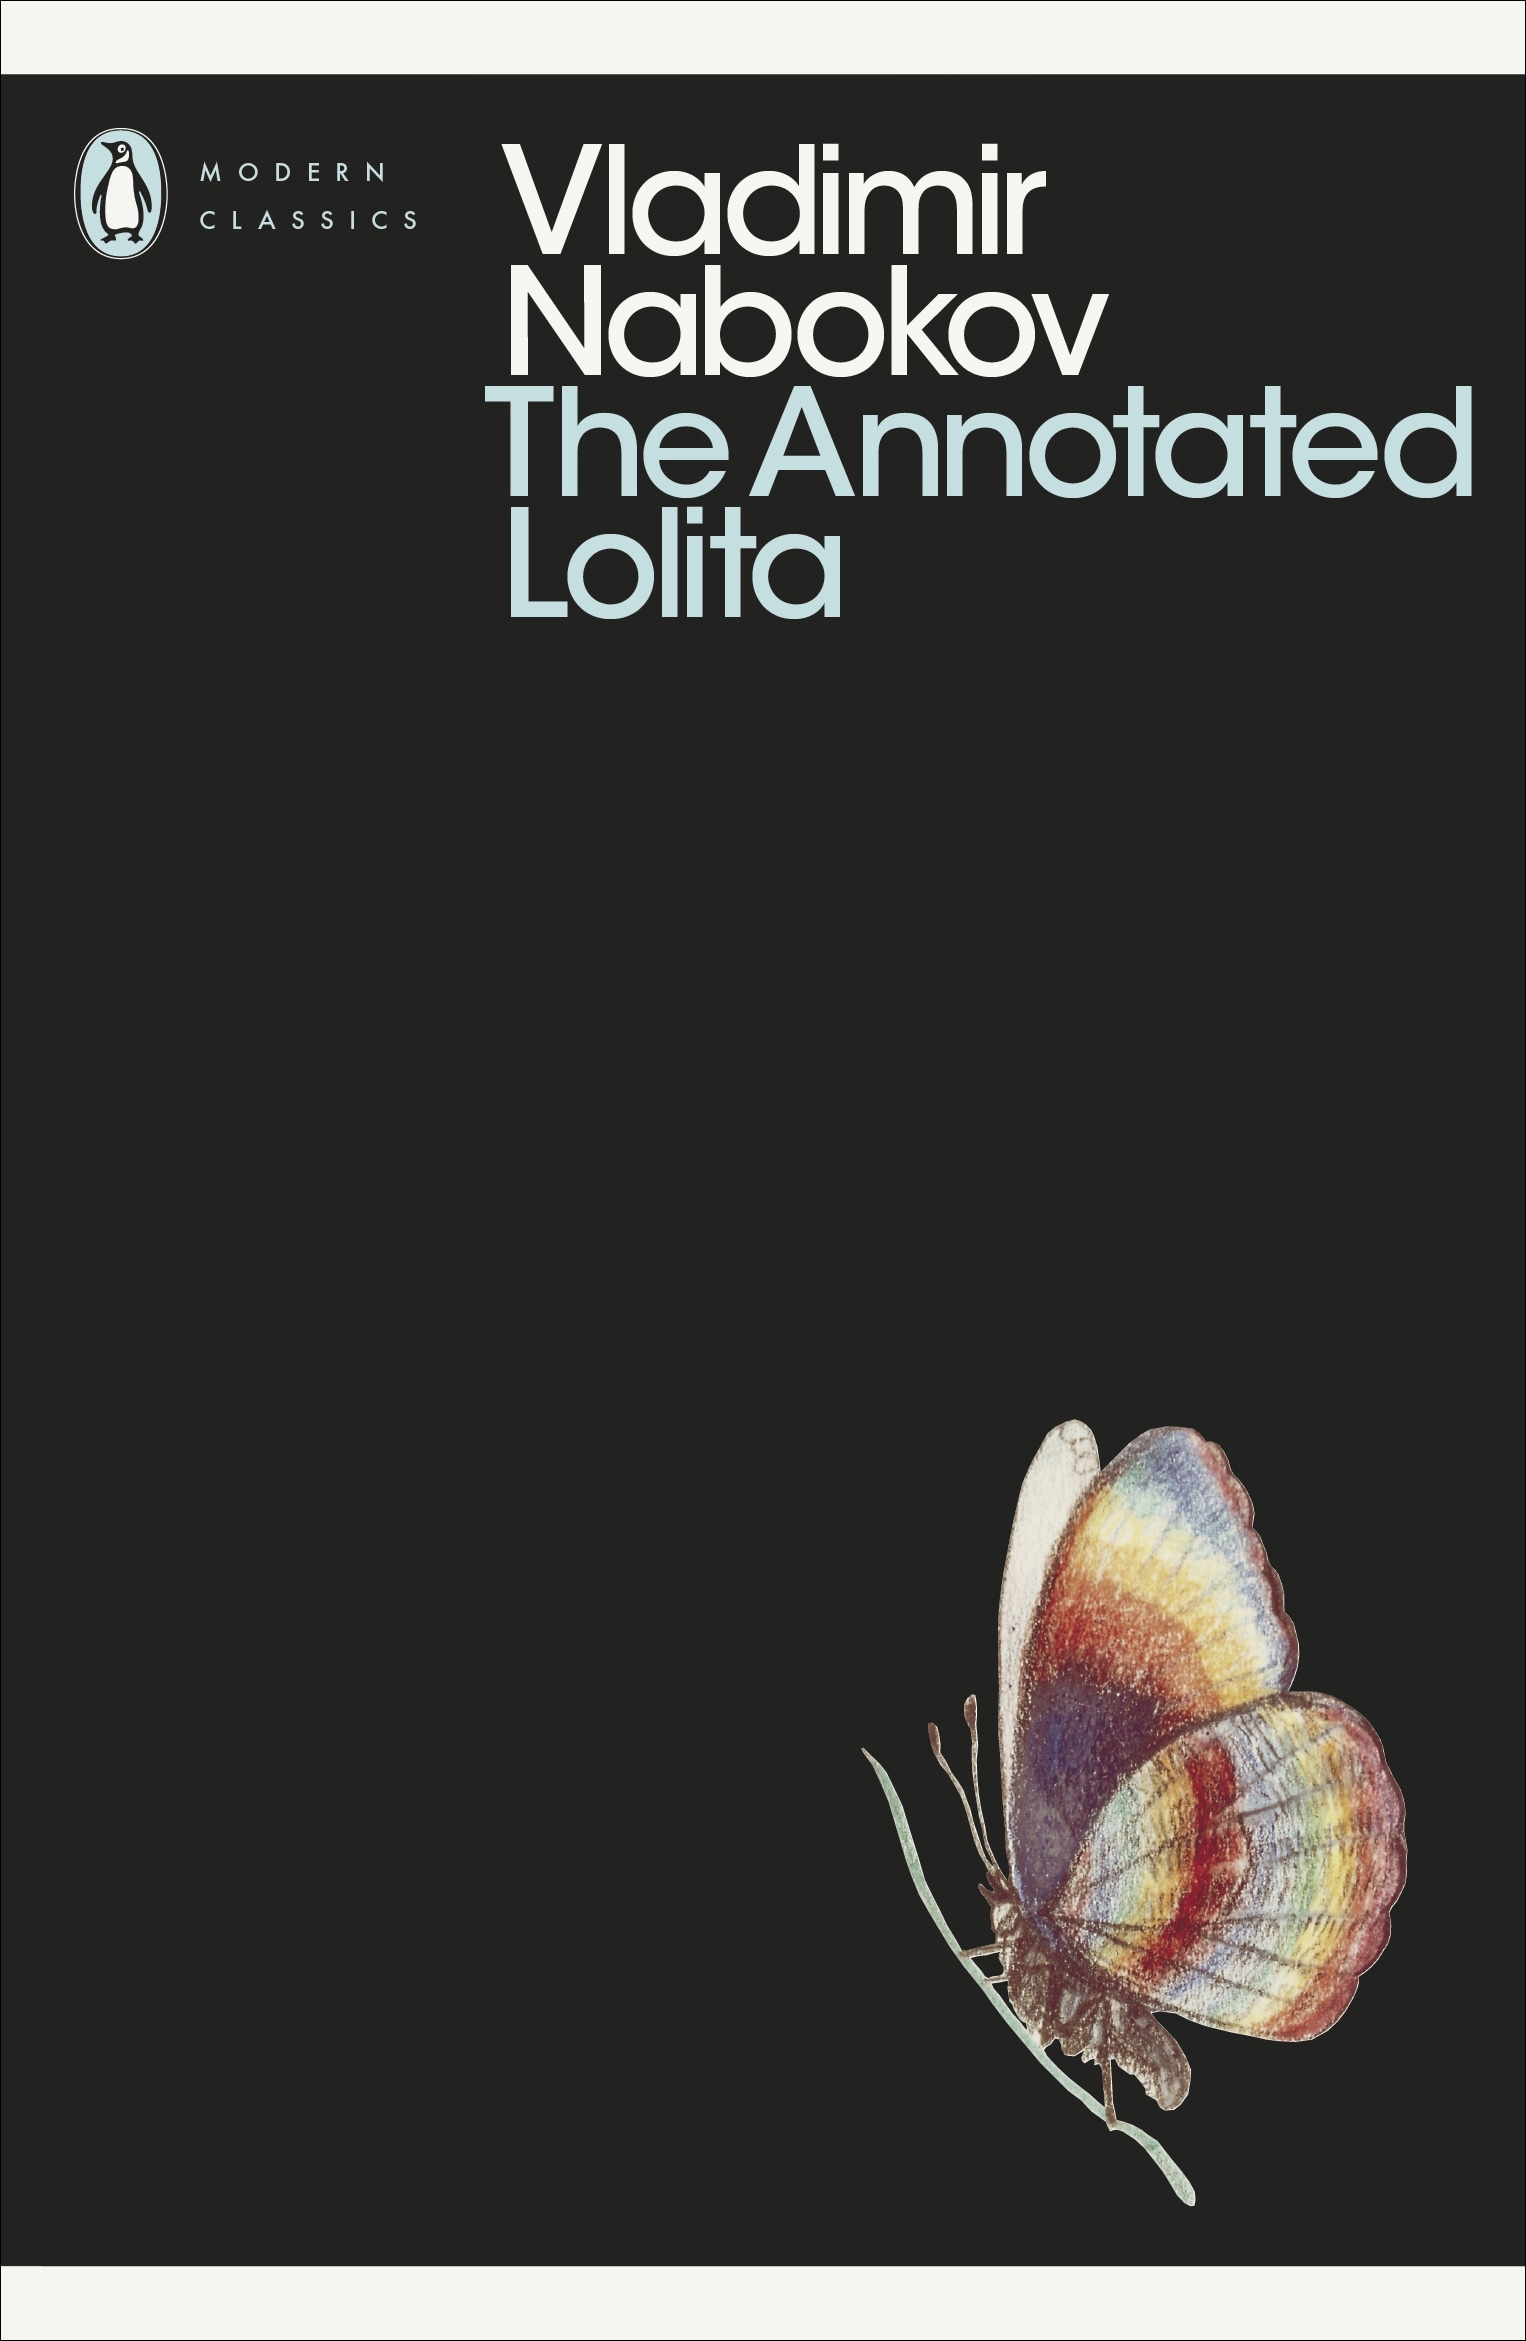 Book “The Annotated Lolita” by Vladimir Nabokov — July 27, 2000